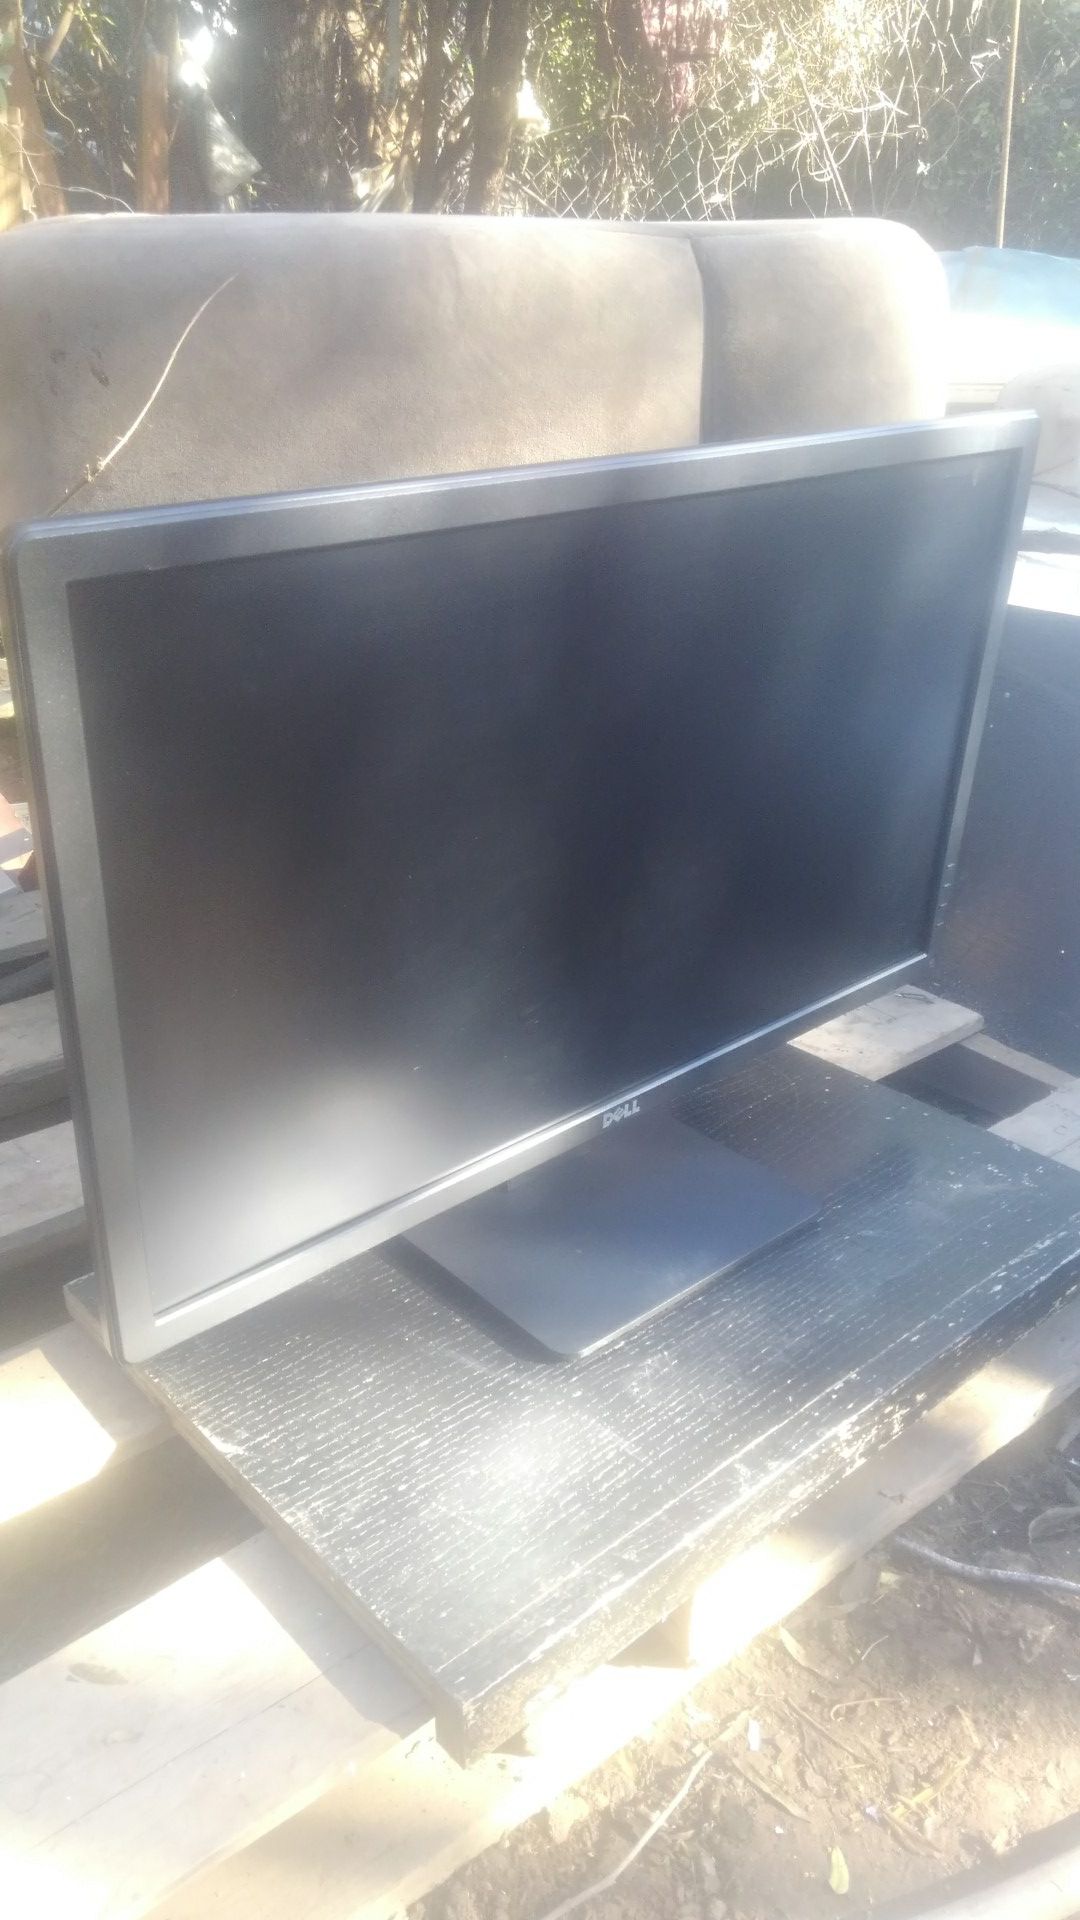 Dell 27 inch LCD high-definition monitor, model number E2715 Hf